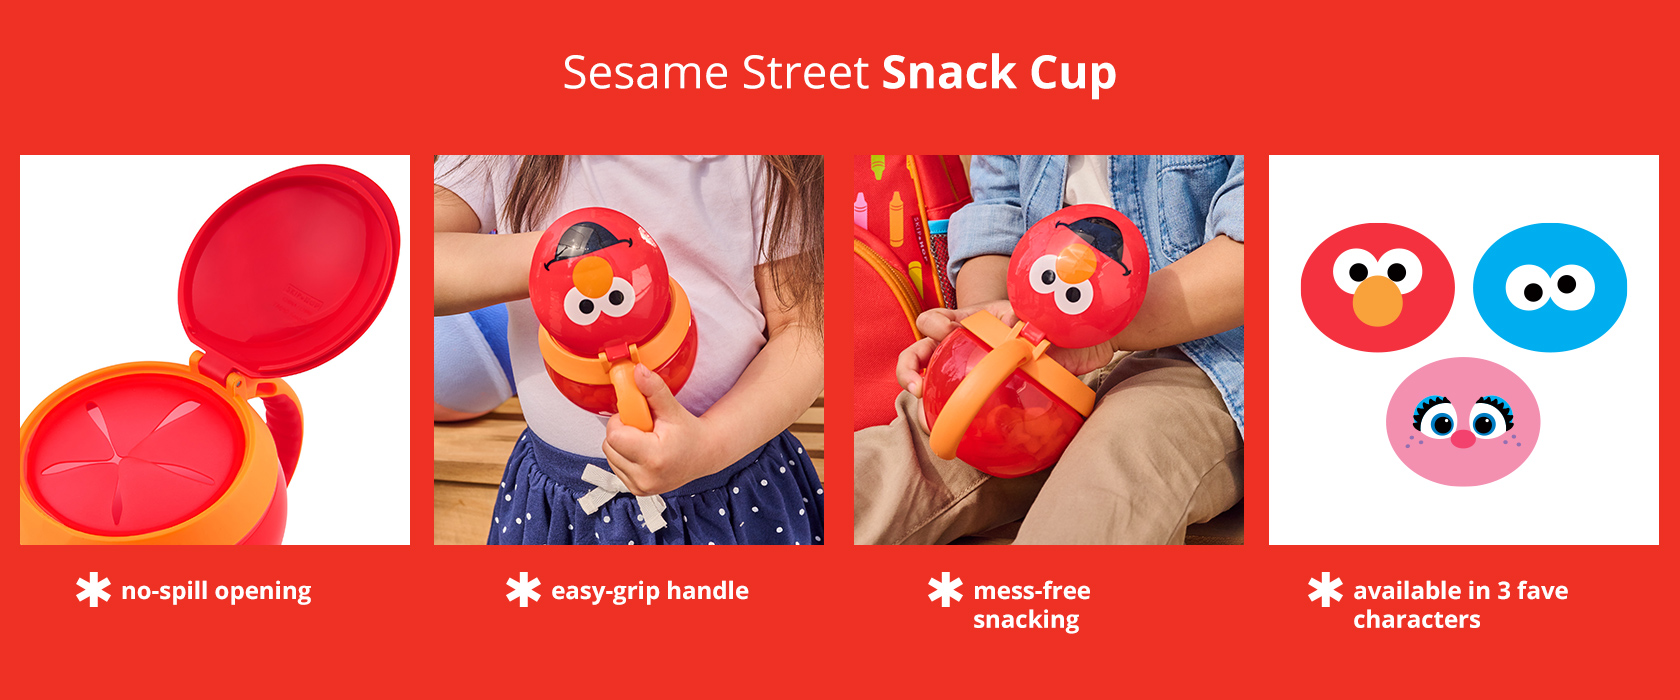 Skiphop x Sesame Street Snack Cup - Cookie Monster with no spill opening, easy grip handle, allows mess free snacking - available in 3 fave characters 